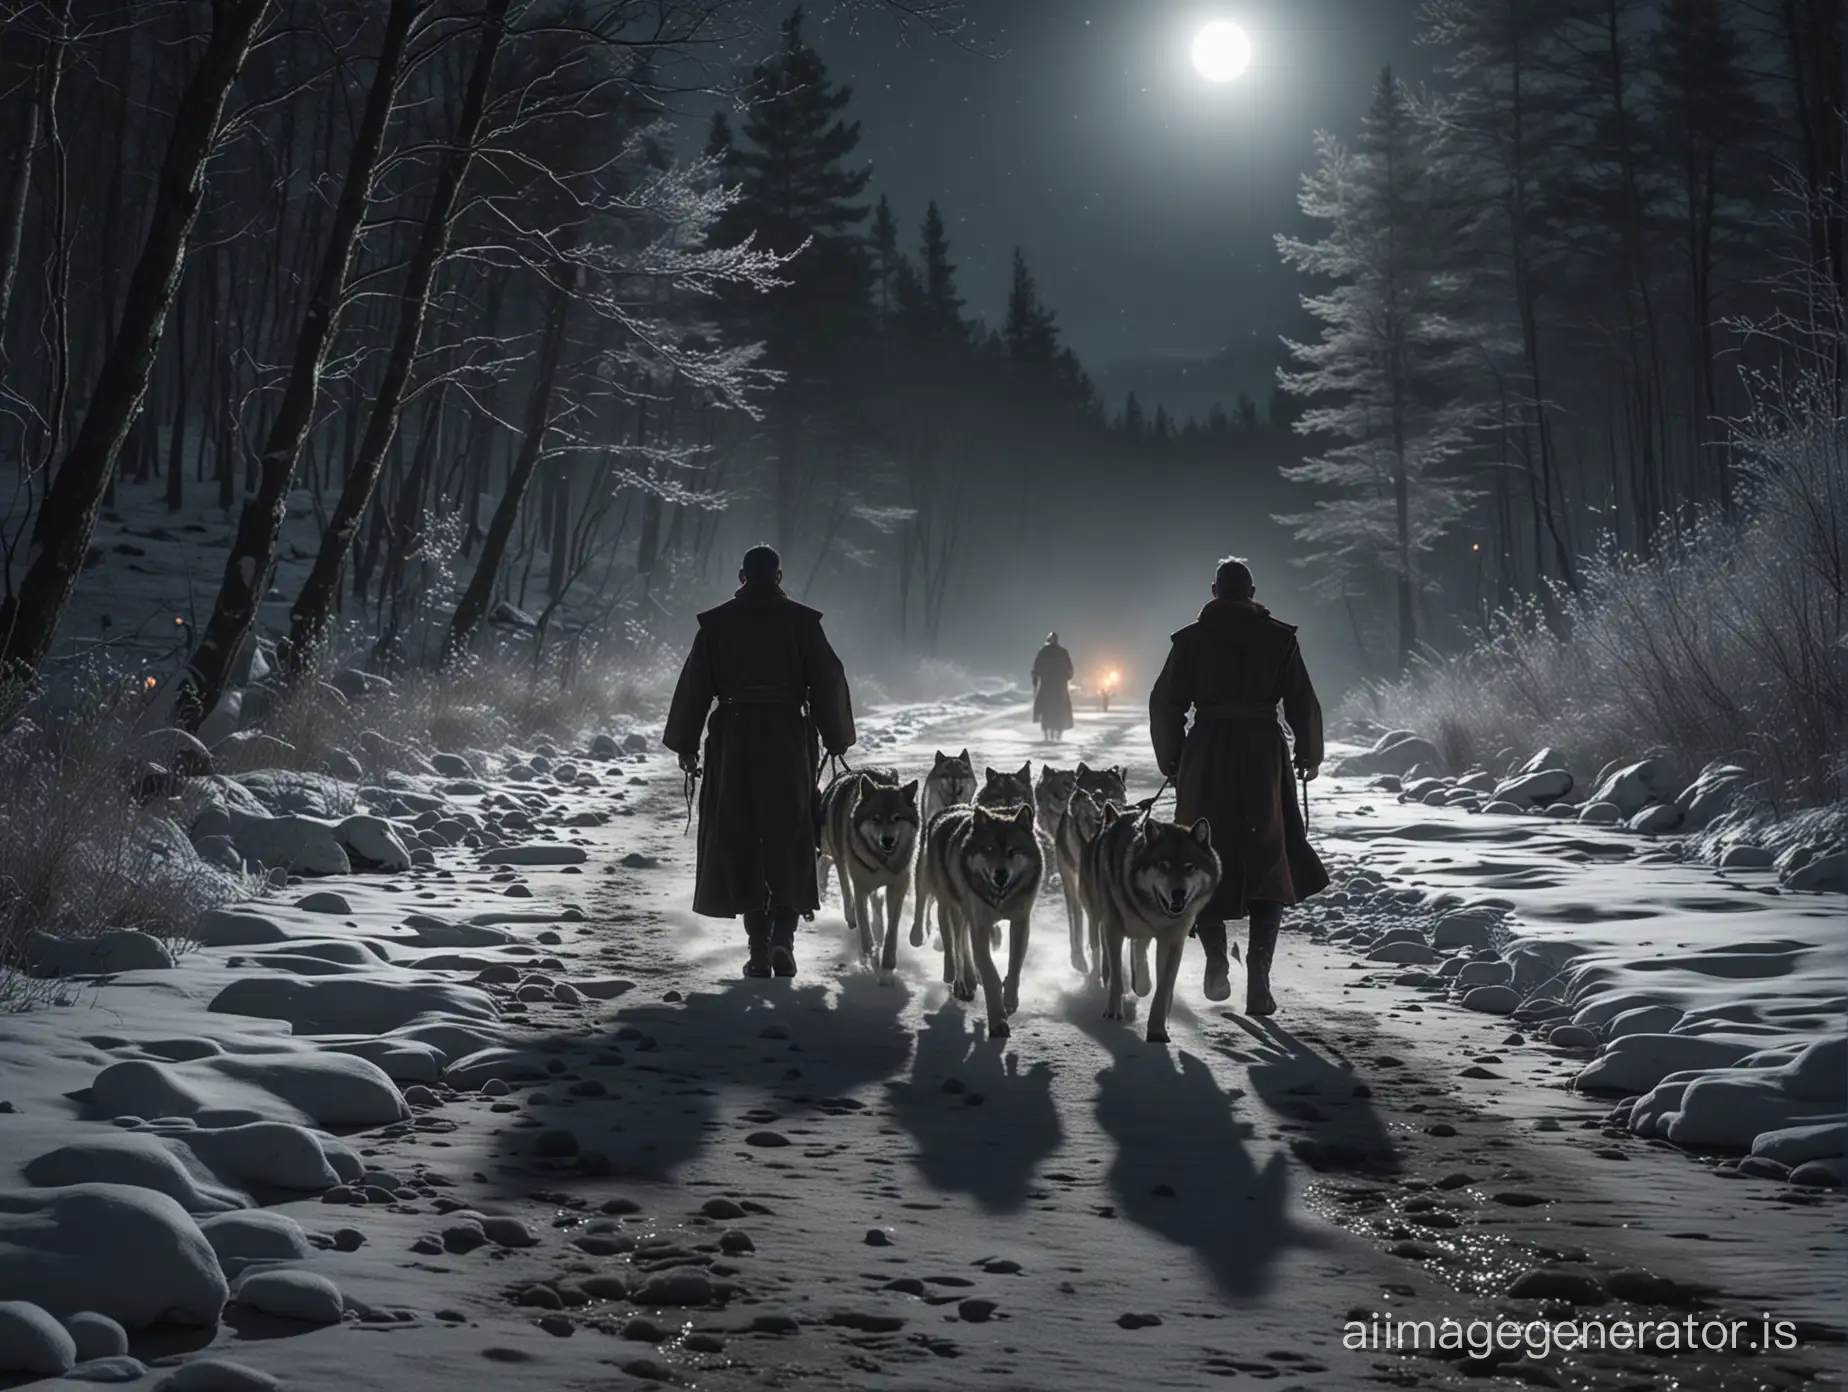 A lone priest runs , a pack of  wolves with fiery eyes trail behind him. winter night scene with a Frozen river surrounded by dense woods and rocky banks.  full moon lights the scene,  dramatic lighting, realistic depiction of nature, 8K resolution, high level of detail, wide-angle composition, focus on priest